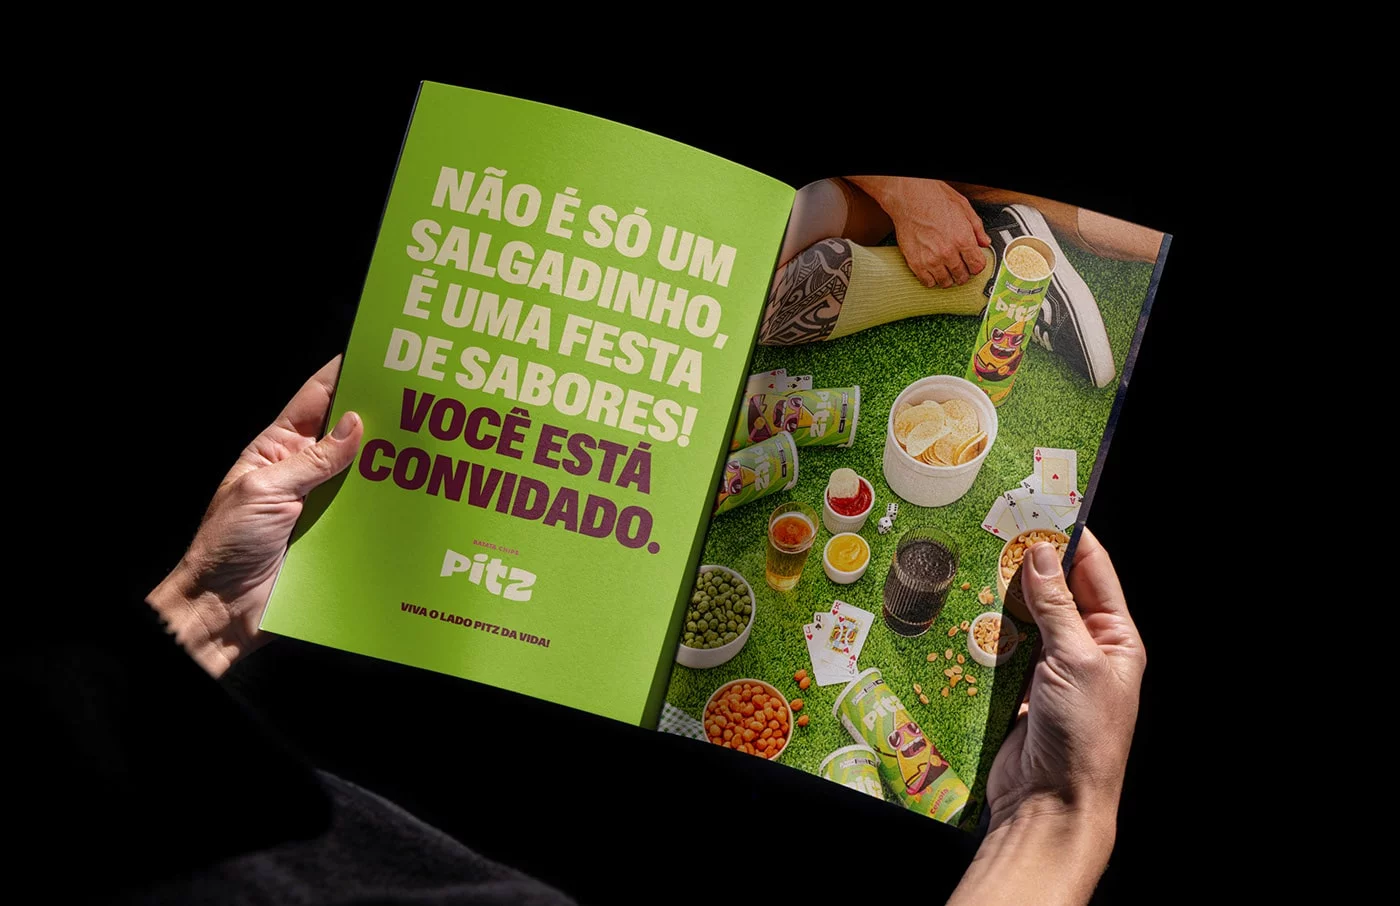 Vibrant Pitz snack packaging featuring a lively green and light color theme with engaging illustrations, capturing the essence of Brazilian energy and flavor.